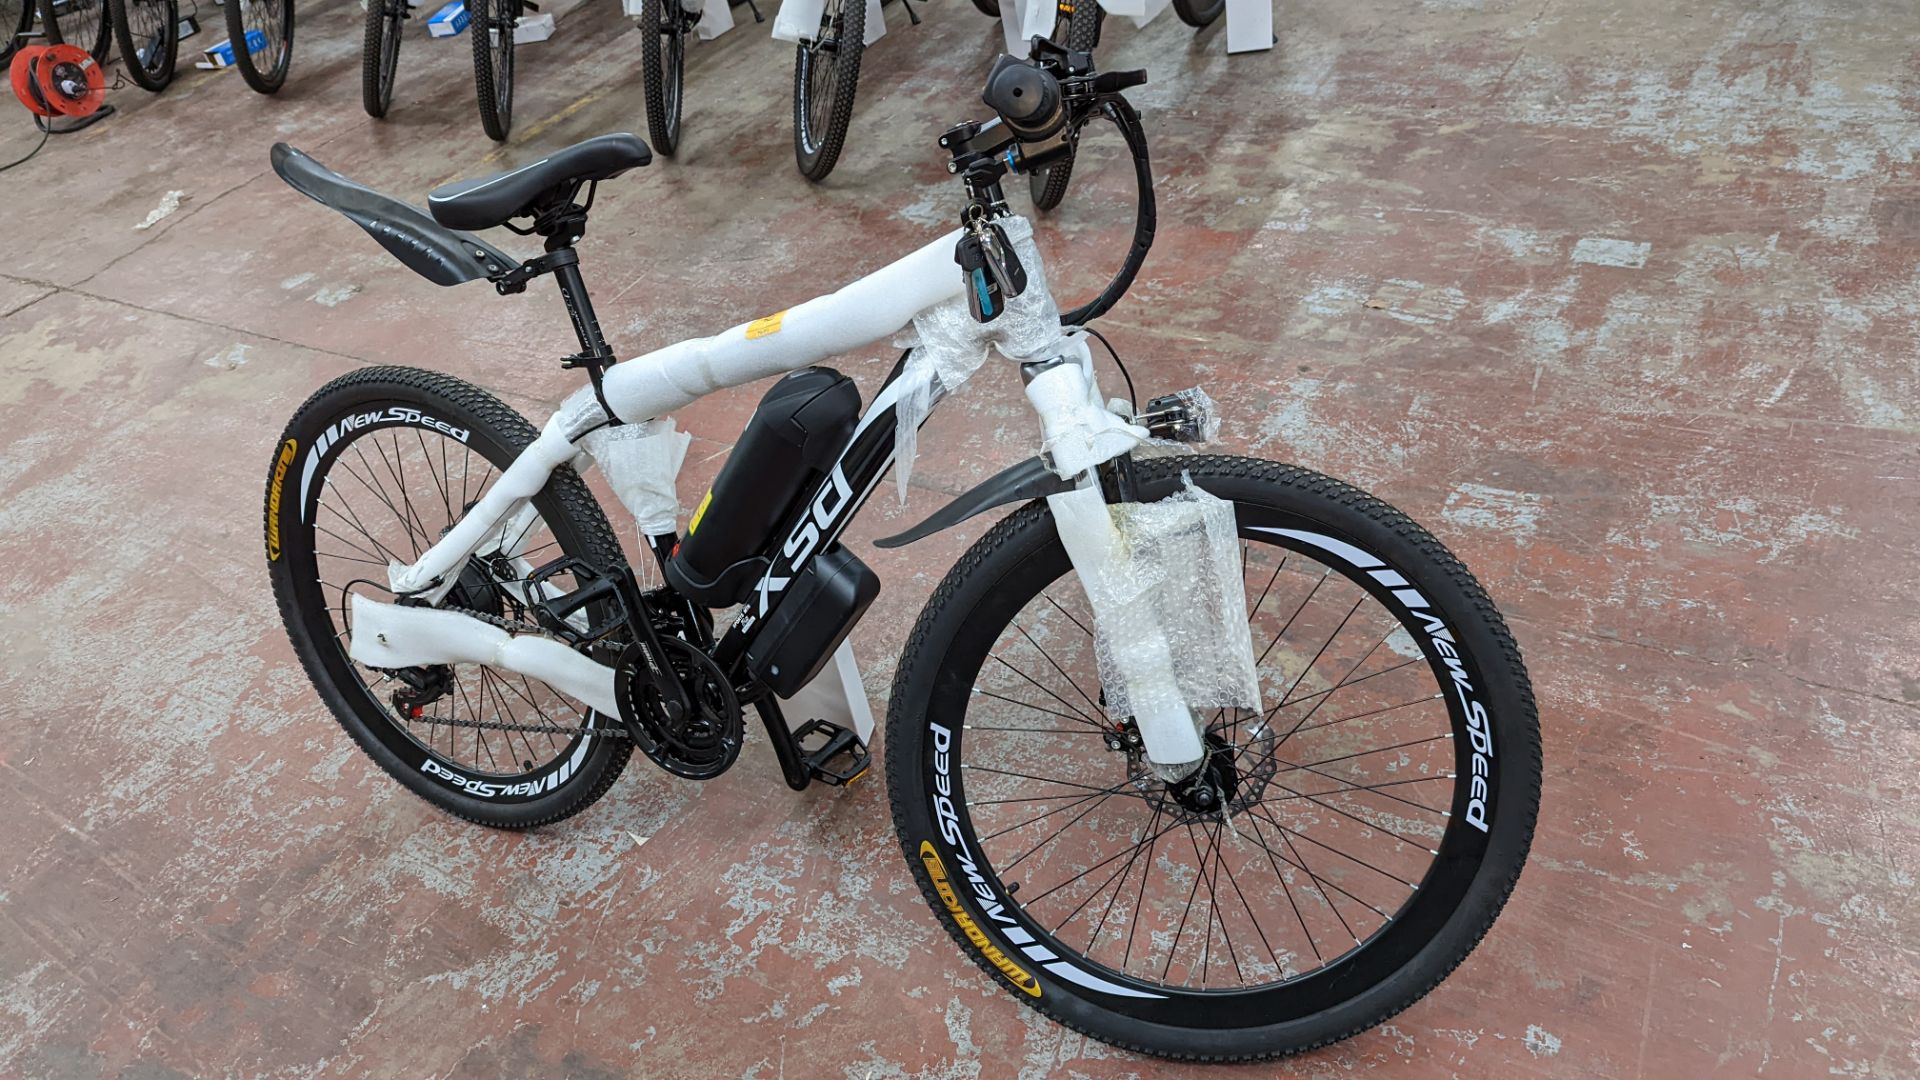 XSD FTX Sport MTB 7.5 Racing electric bike with Shimano Tourney TZ gears. Includes 36v 12AH battery, - Image 11 of 24